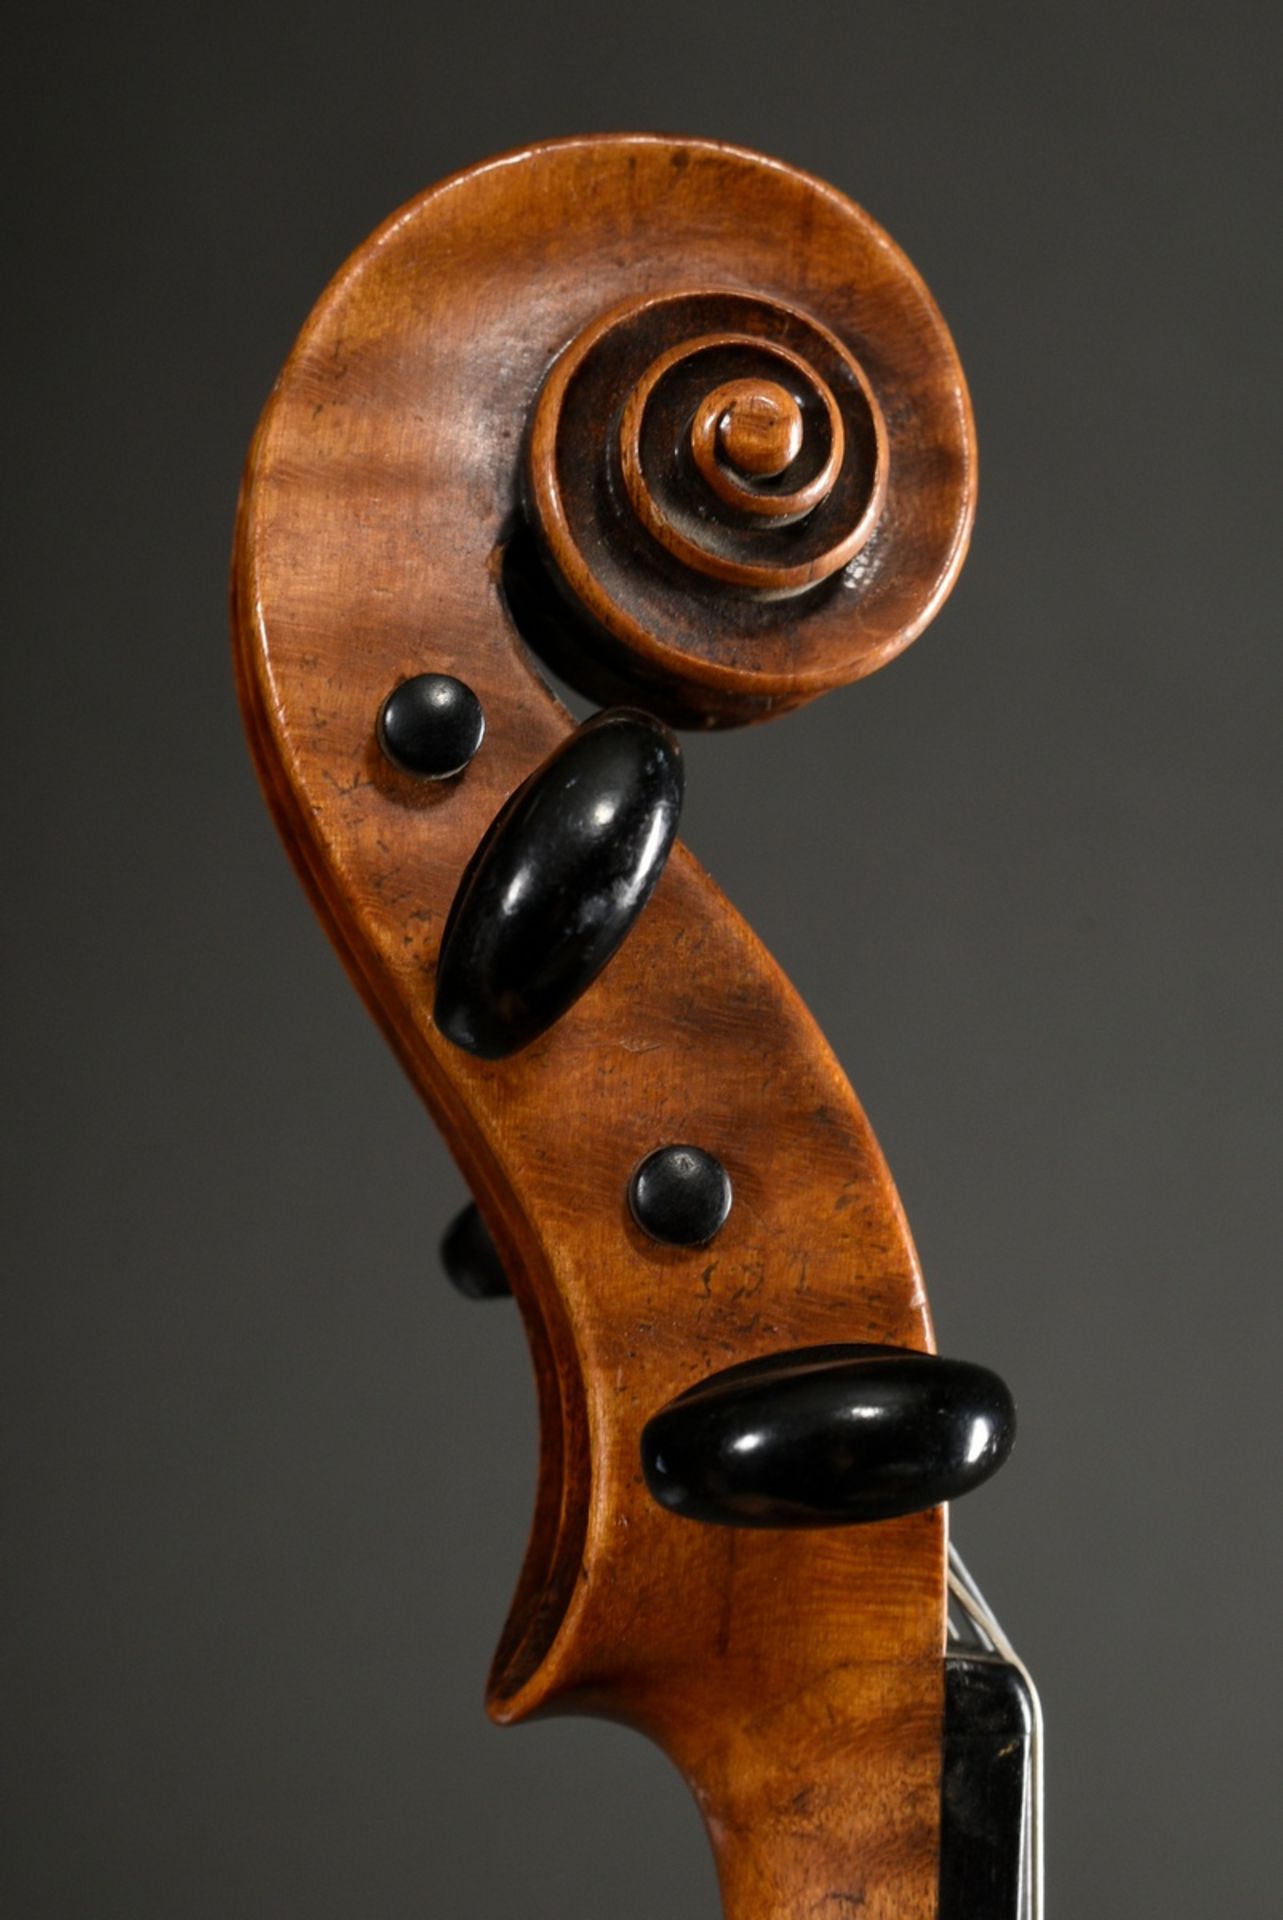 Elegant violin after Maggini, German 19th c., fine-grained spruce top, two-piece beautifully flamed - Image 6 of 16